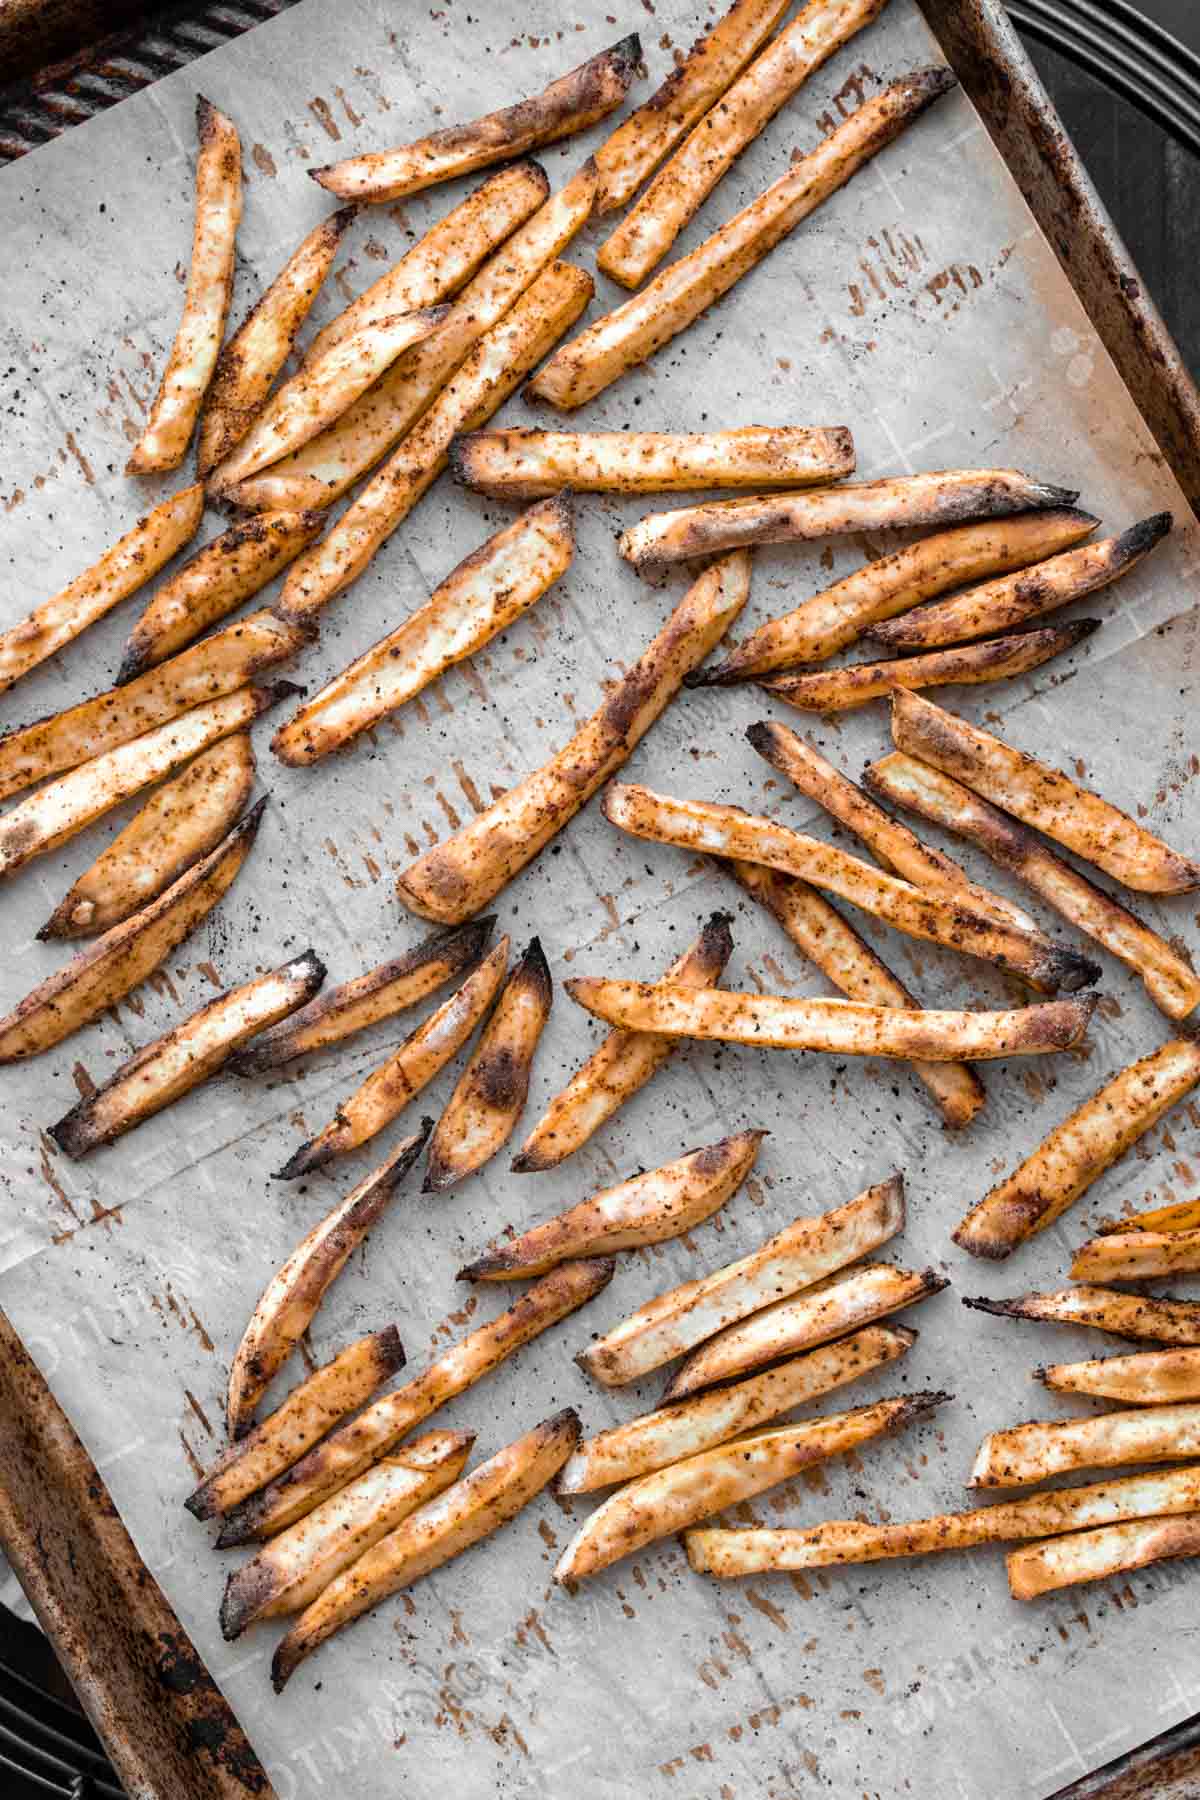 A pan with parchment paper and baked sweet potato fries covered in seasoning.